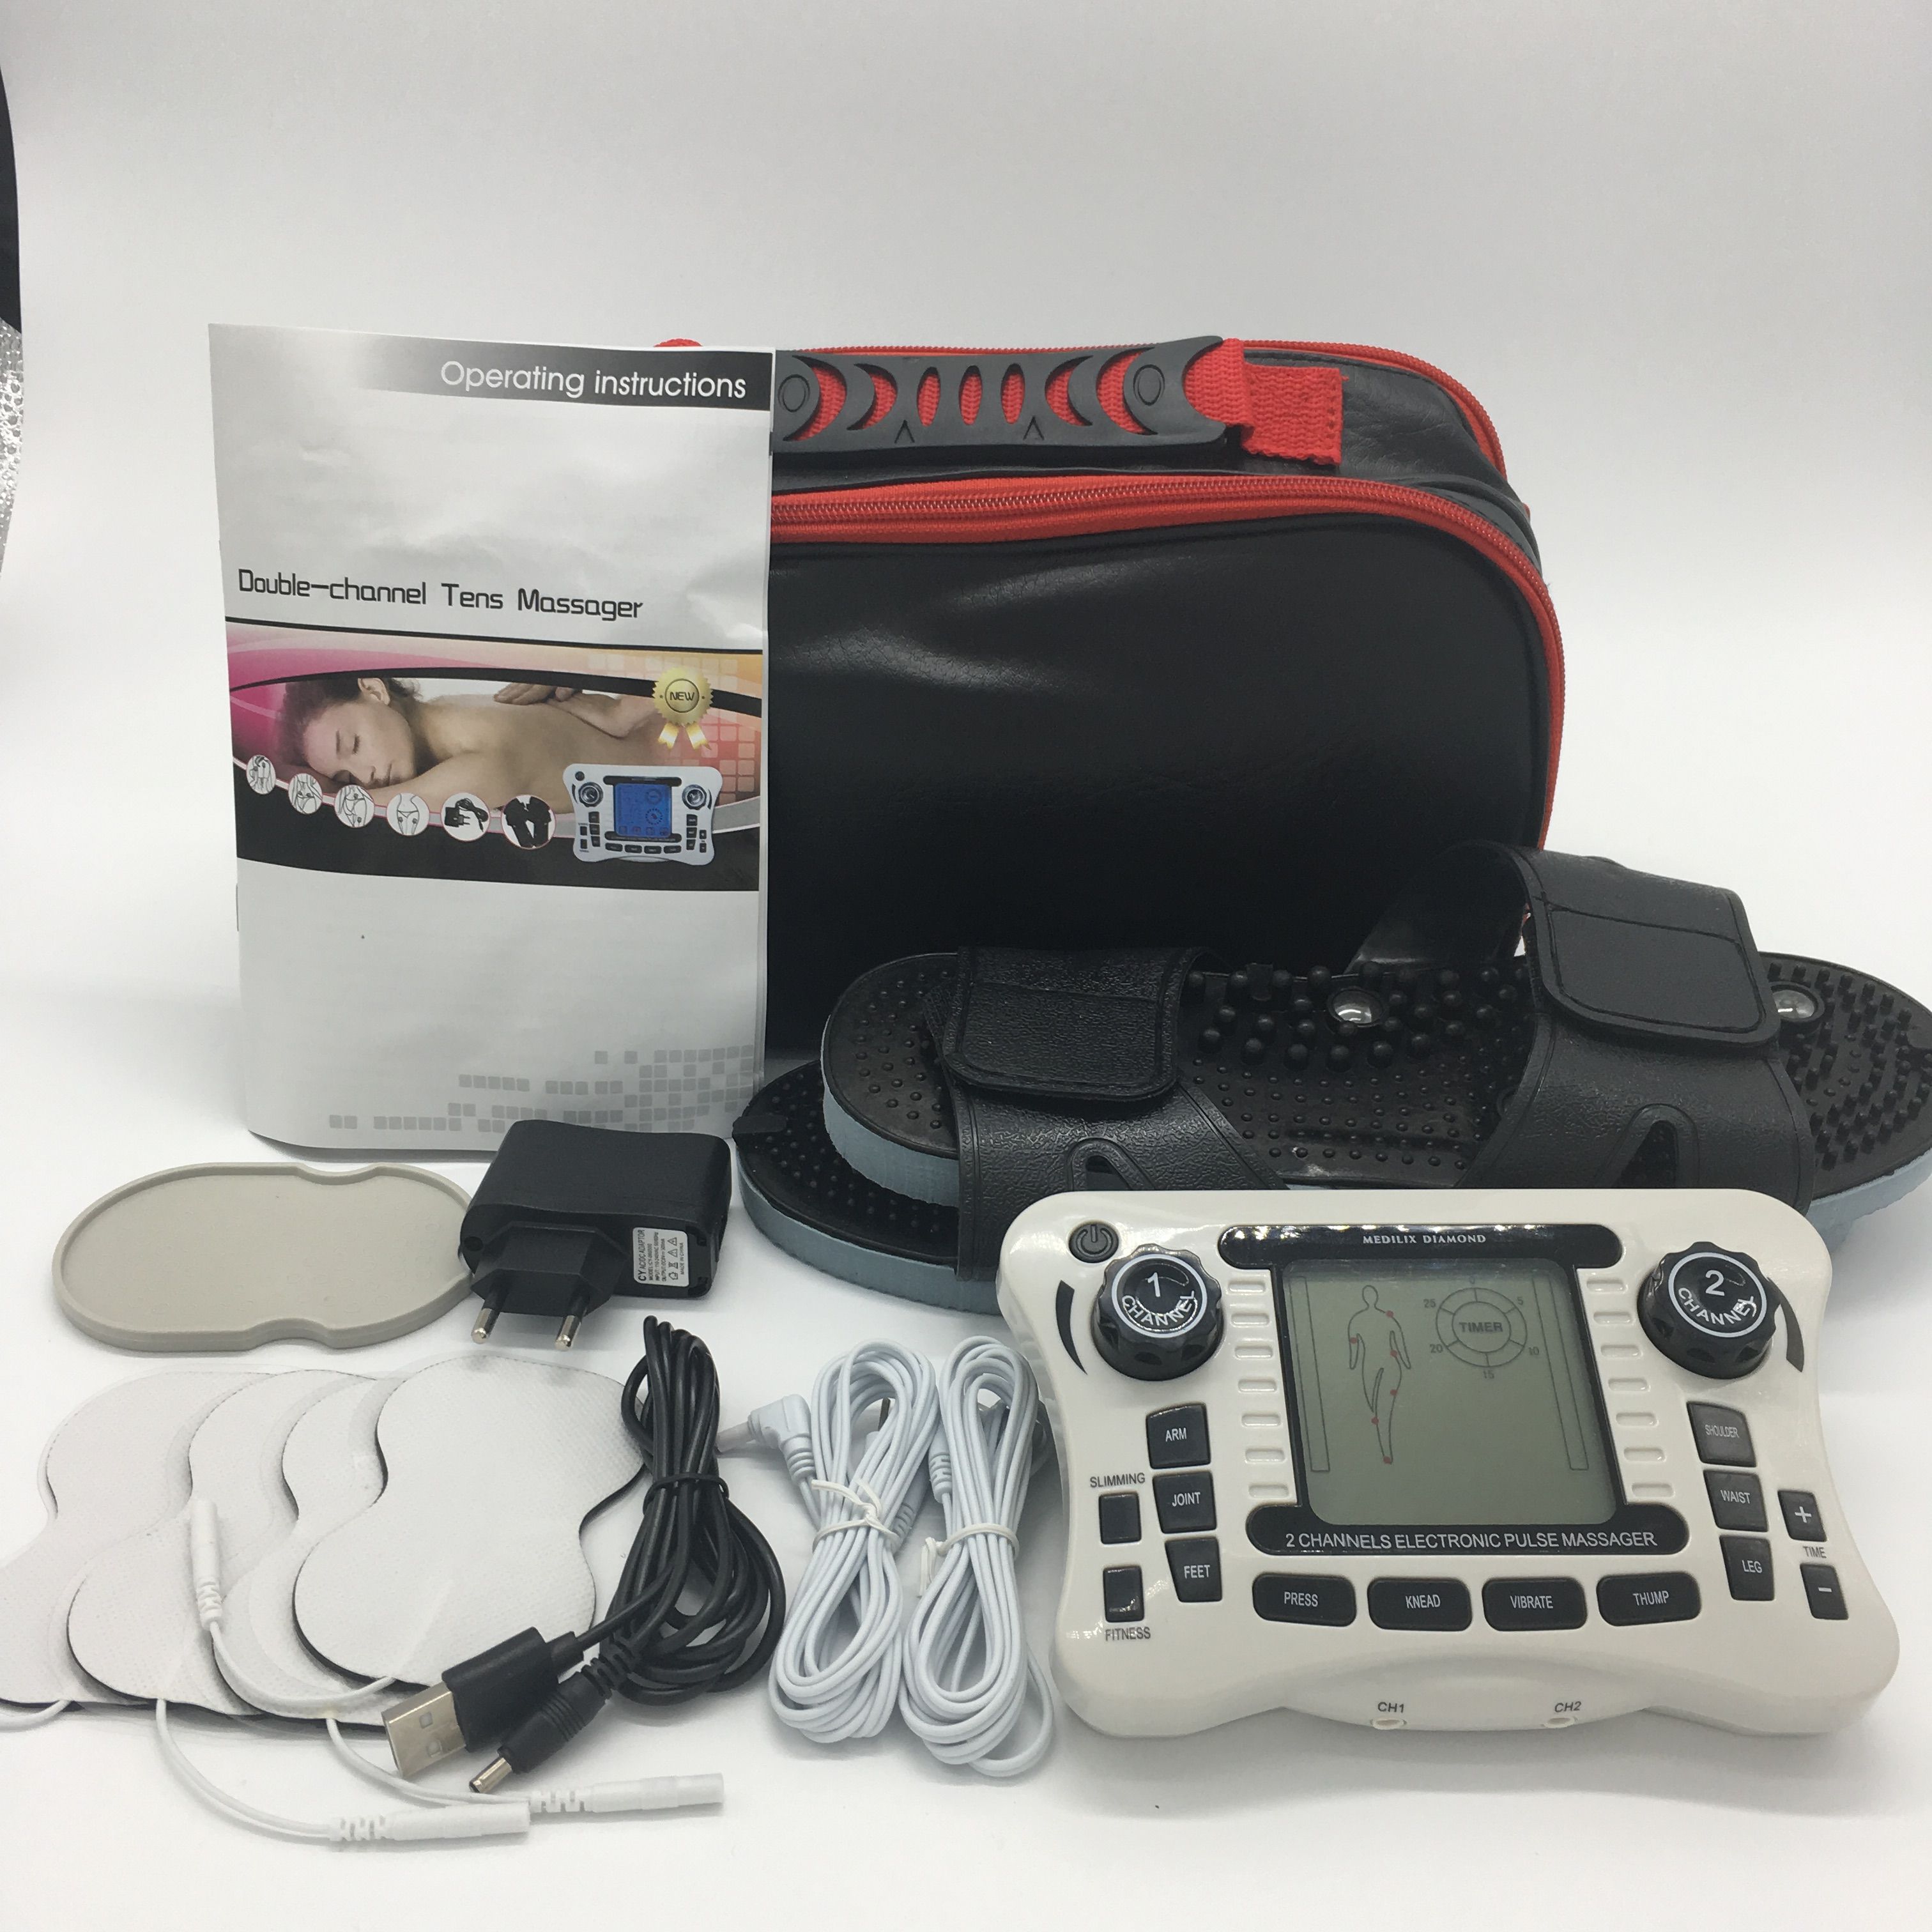 110 240V TENS Digital Therapy Dual Channel Output EMS Pain Relief Massager Electrical Nerve Muscle Stimulator Physiotherapy 2017 NEW Therapist Supplies